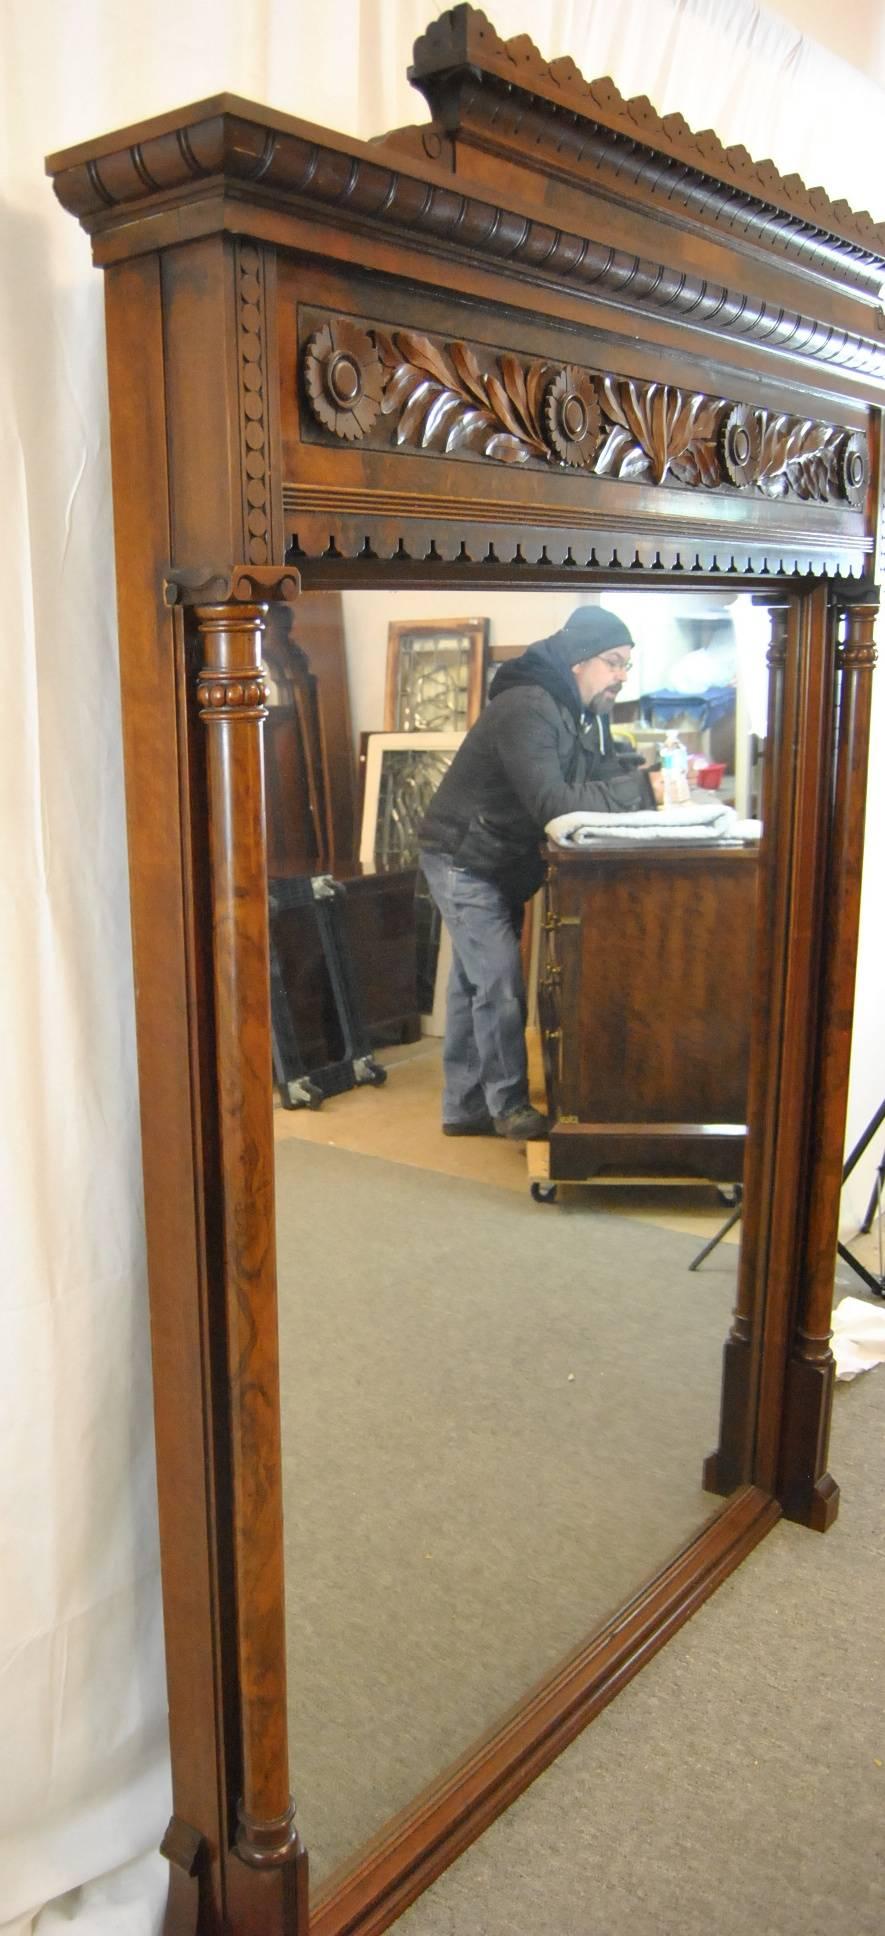 A beautiful walnut Victorian 81" tall walnut mantel mirror. The mirror has great high relief carved leafs and stylized flowers at the top of the frame inset within burl border. A burled wood crown plate is removable for a different look. Full